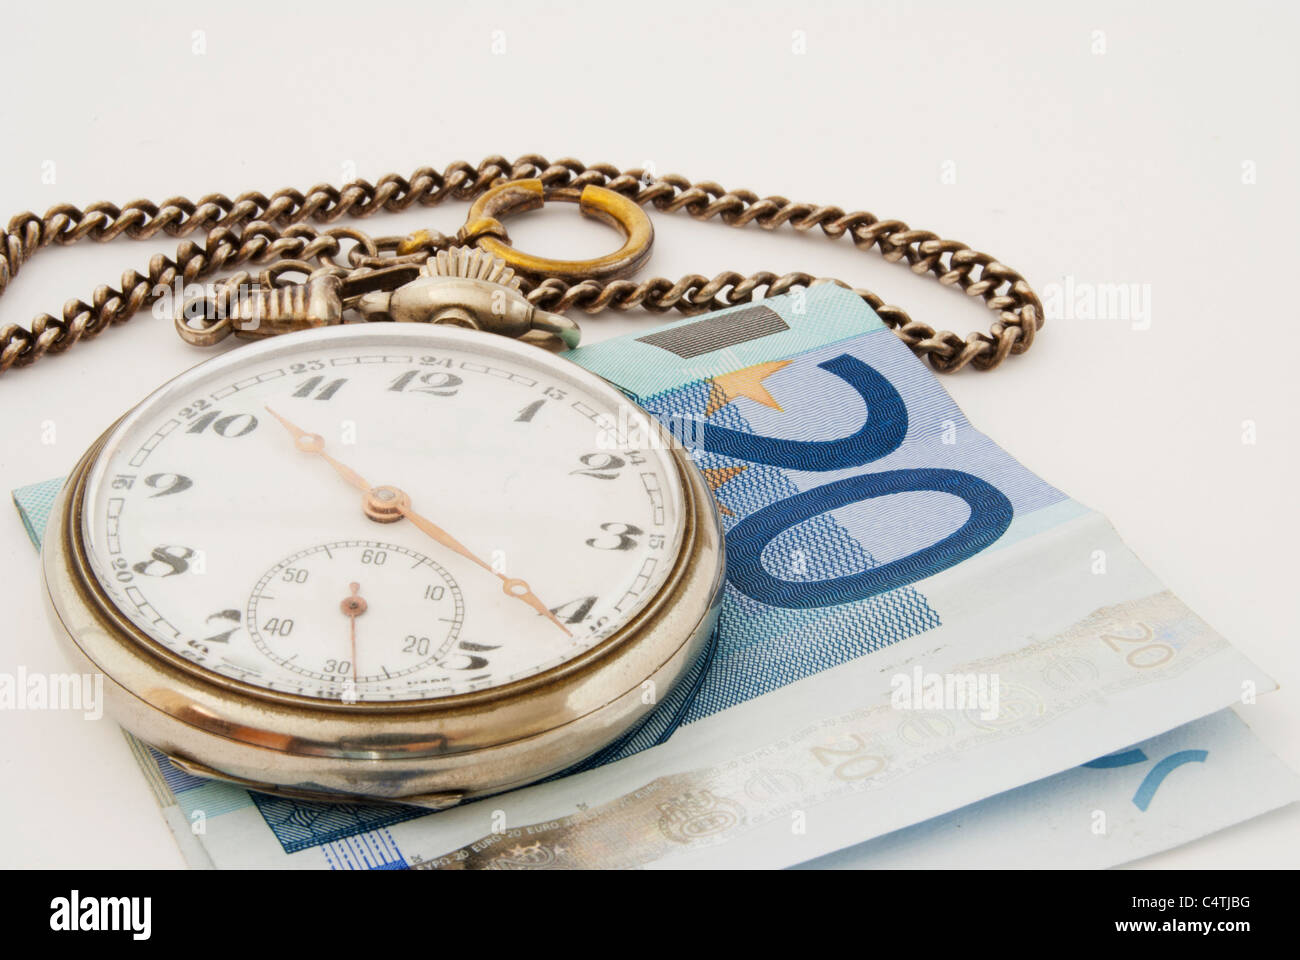 Euro Money A Watch And Chain Stock Photo Alamy